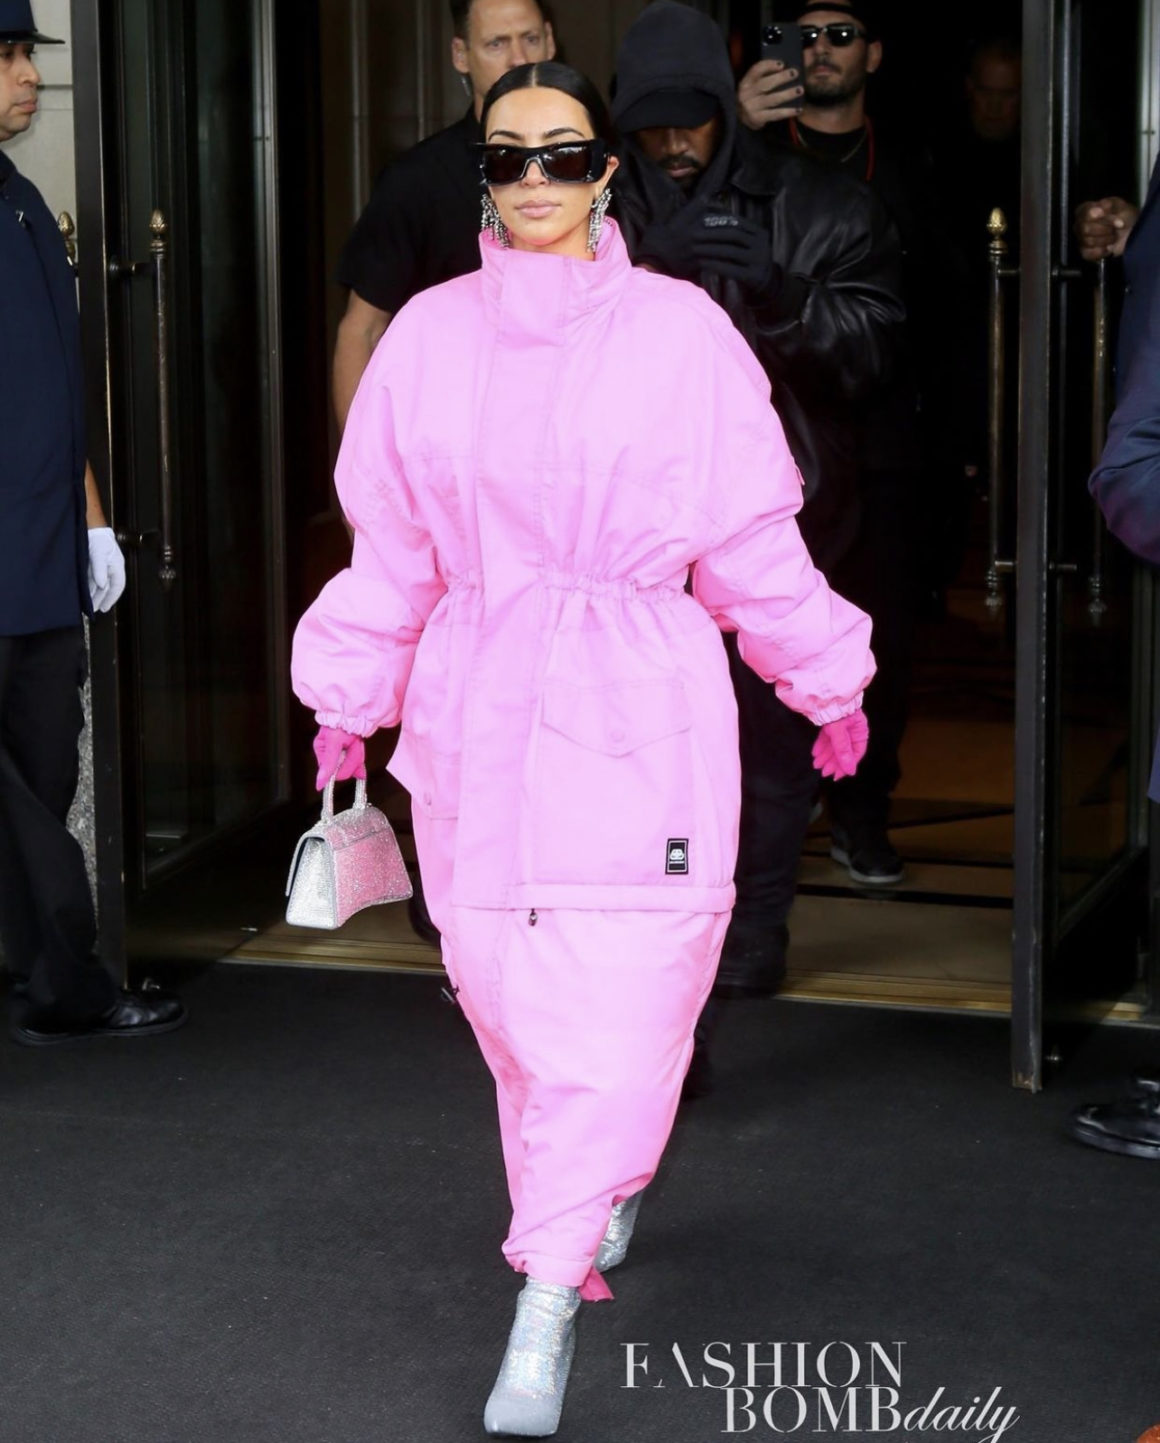 Kim Kardashian Heads Out With Kanye West in NYC Wearing New Pink Look Including Balenciaga Resort 2020 Pink Maxi Puffer Coat